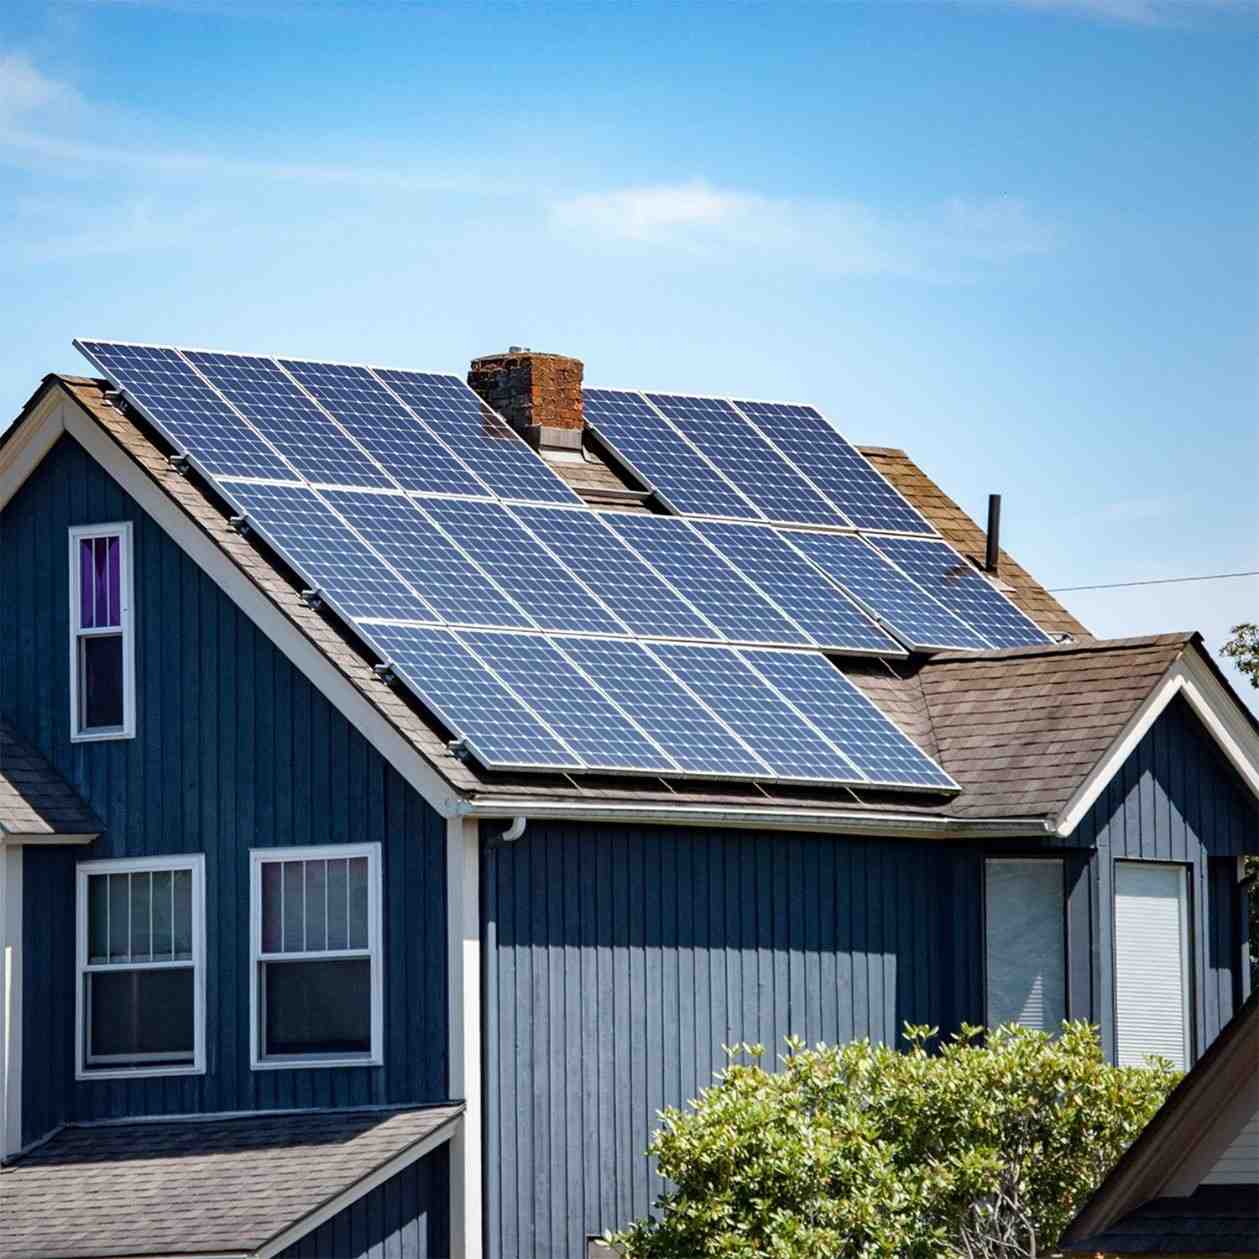 How much power does a 5kW solar system produce a day?